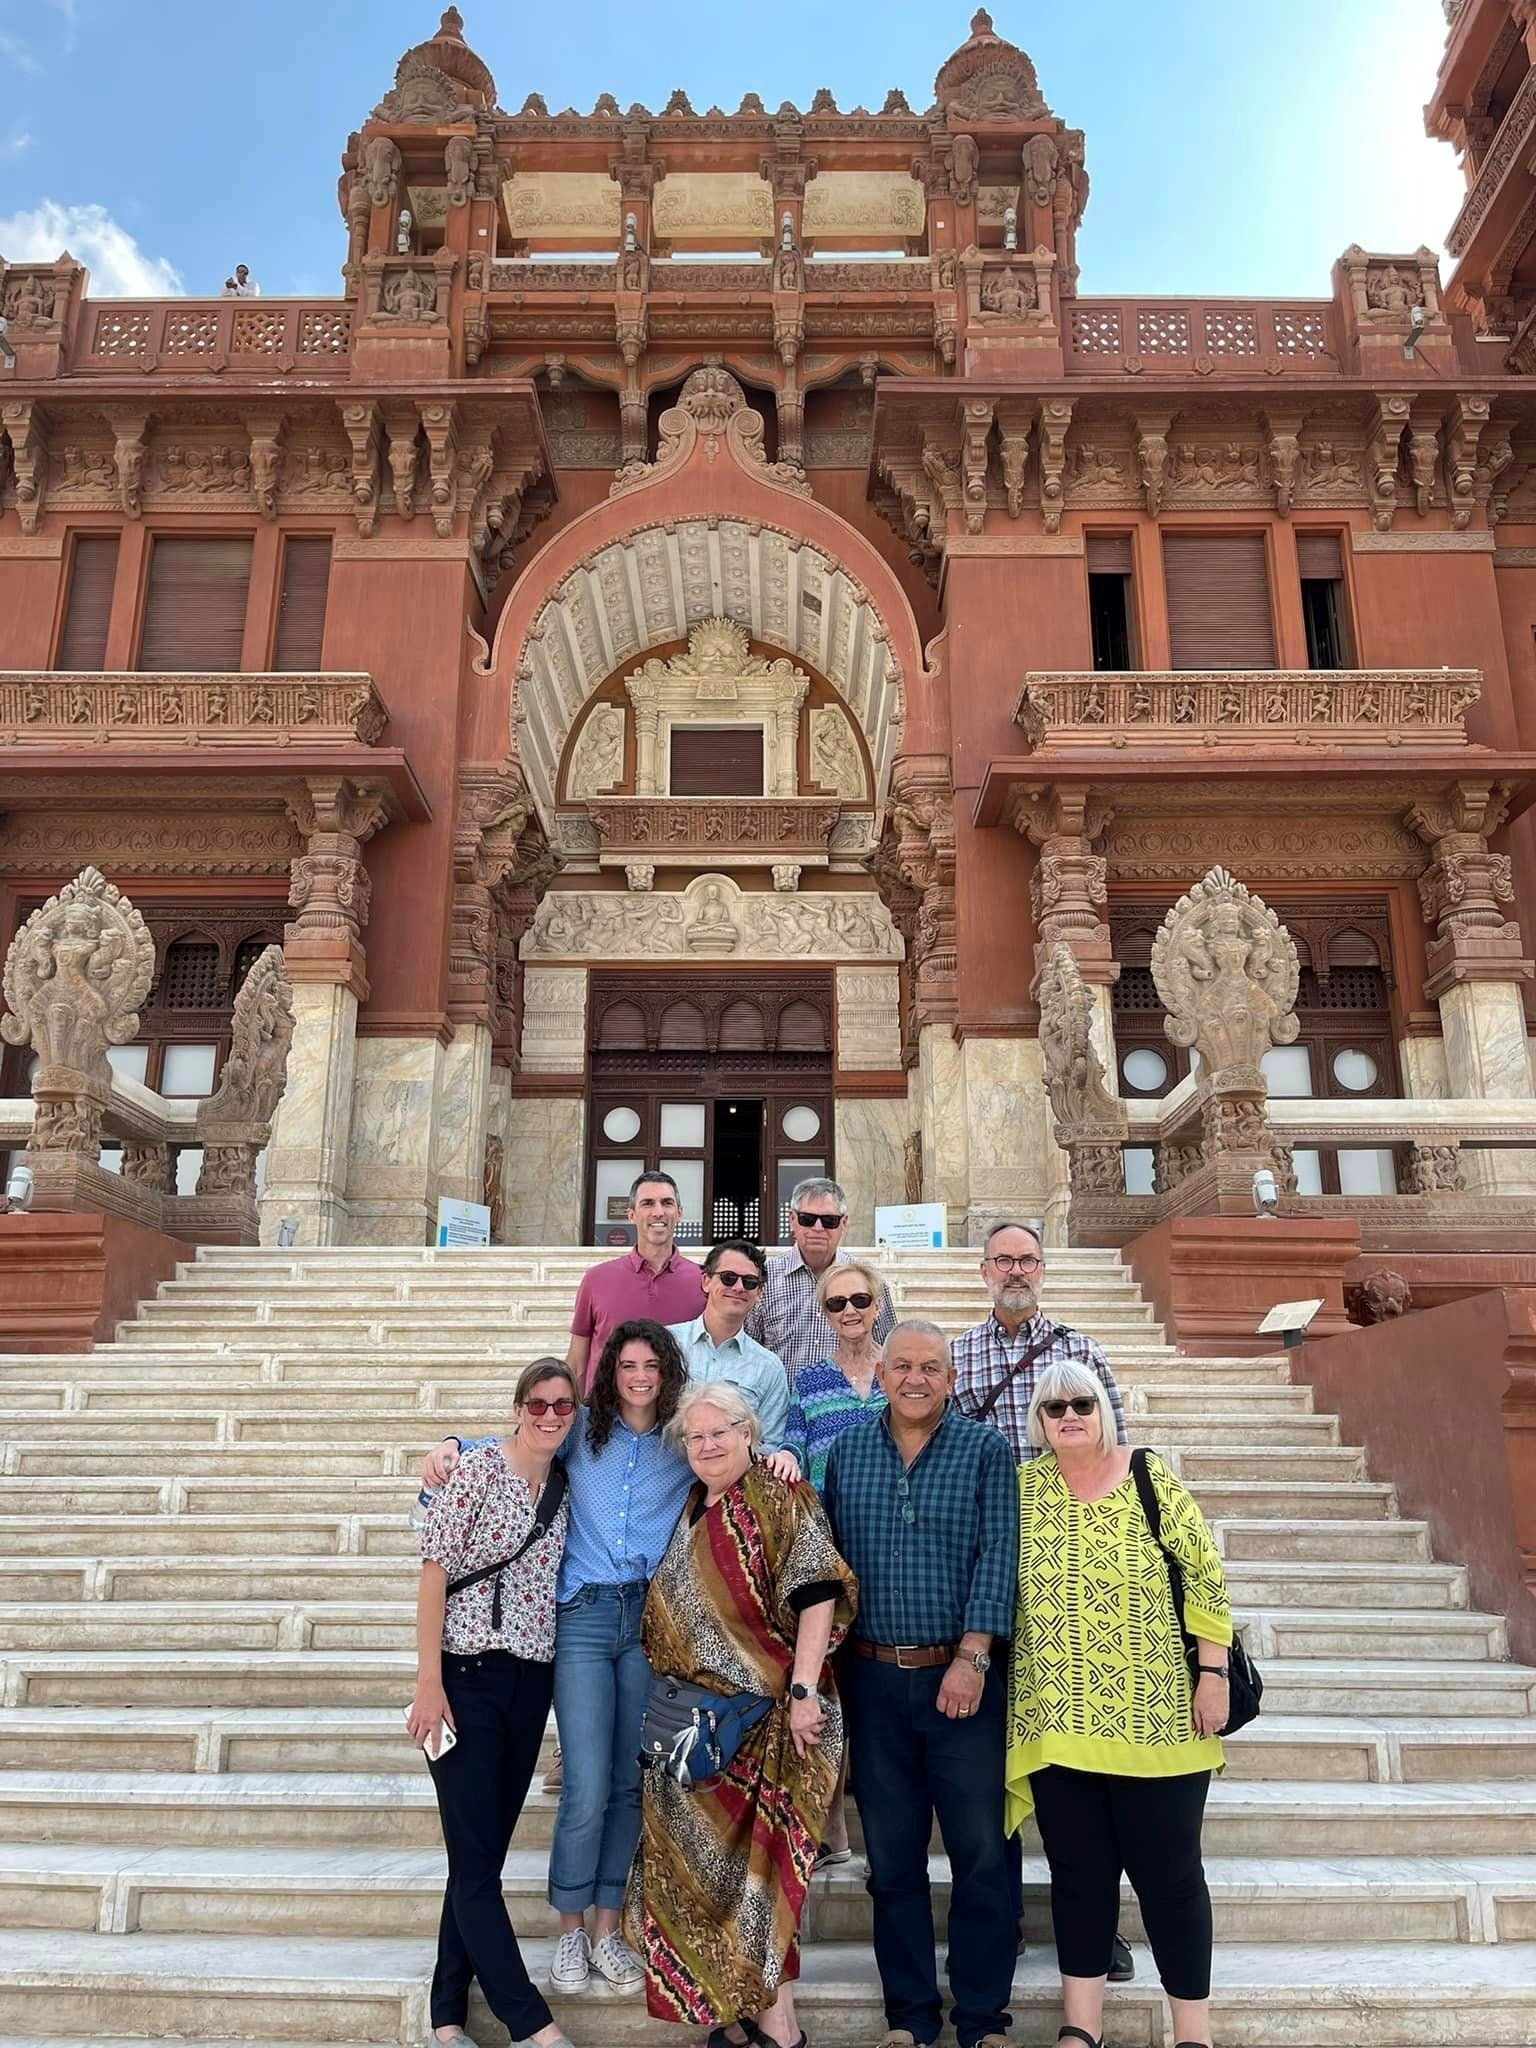  Our team at the Baron Palace. Our precious friend and local travel manager, Mourad Sedky, is in the front row in the blue shirt 